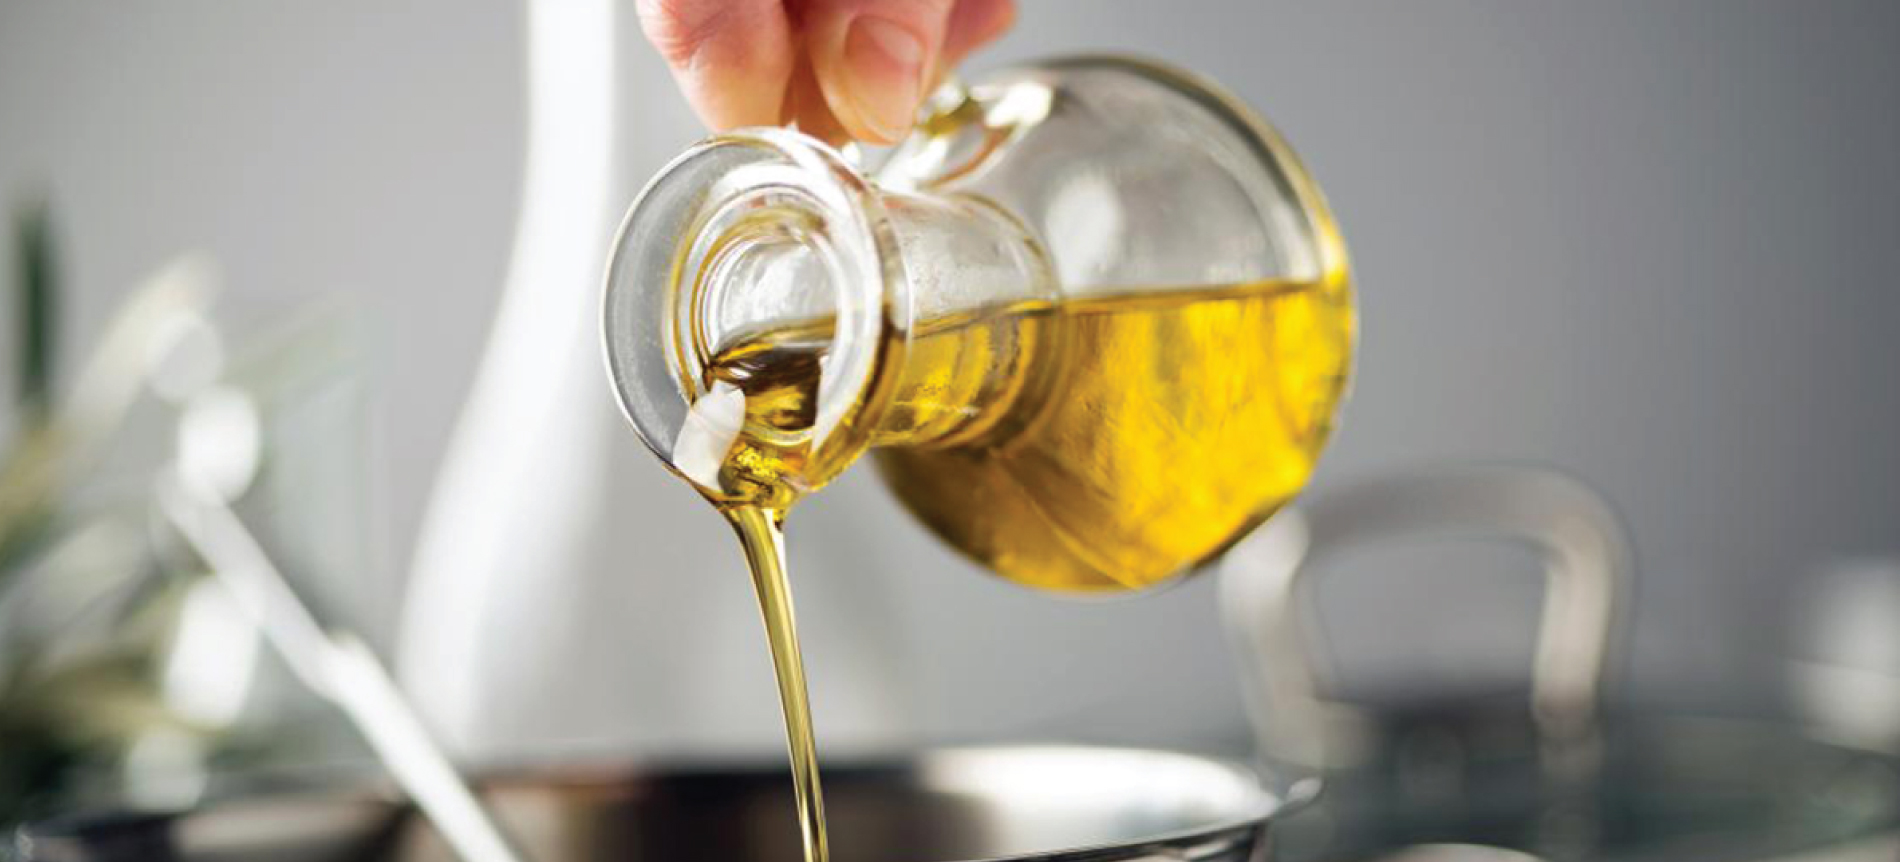 Cooking Edible Oil Products